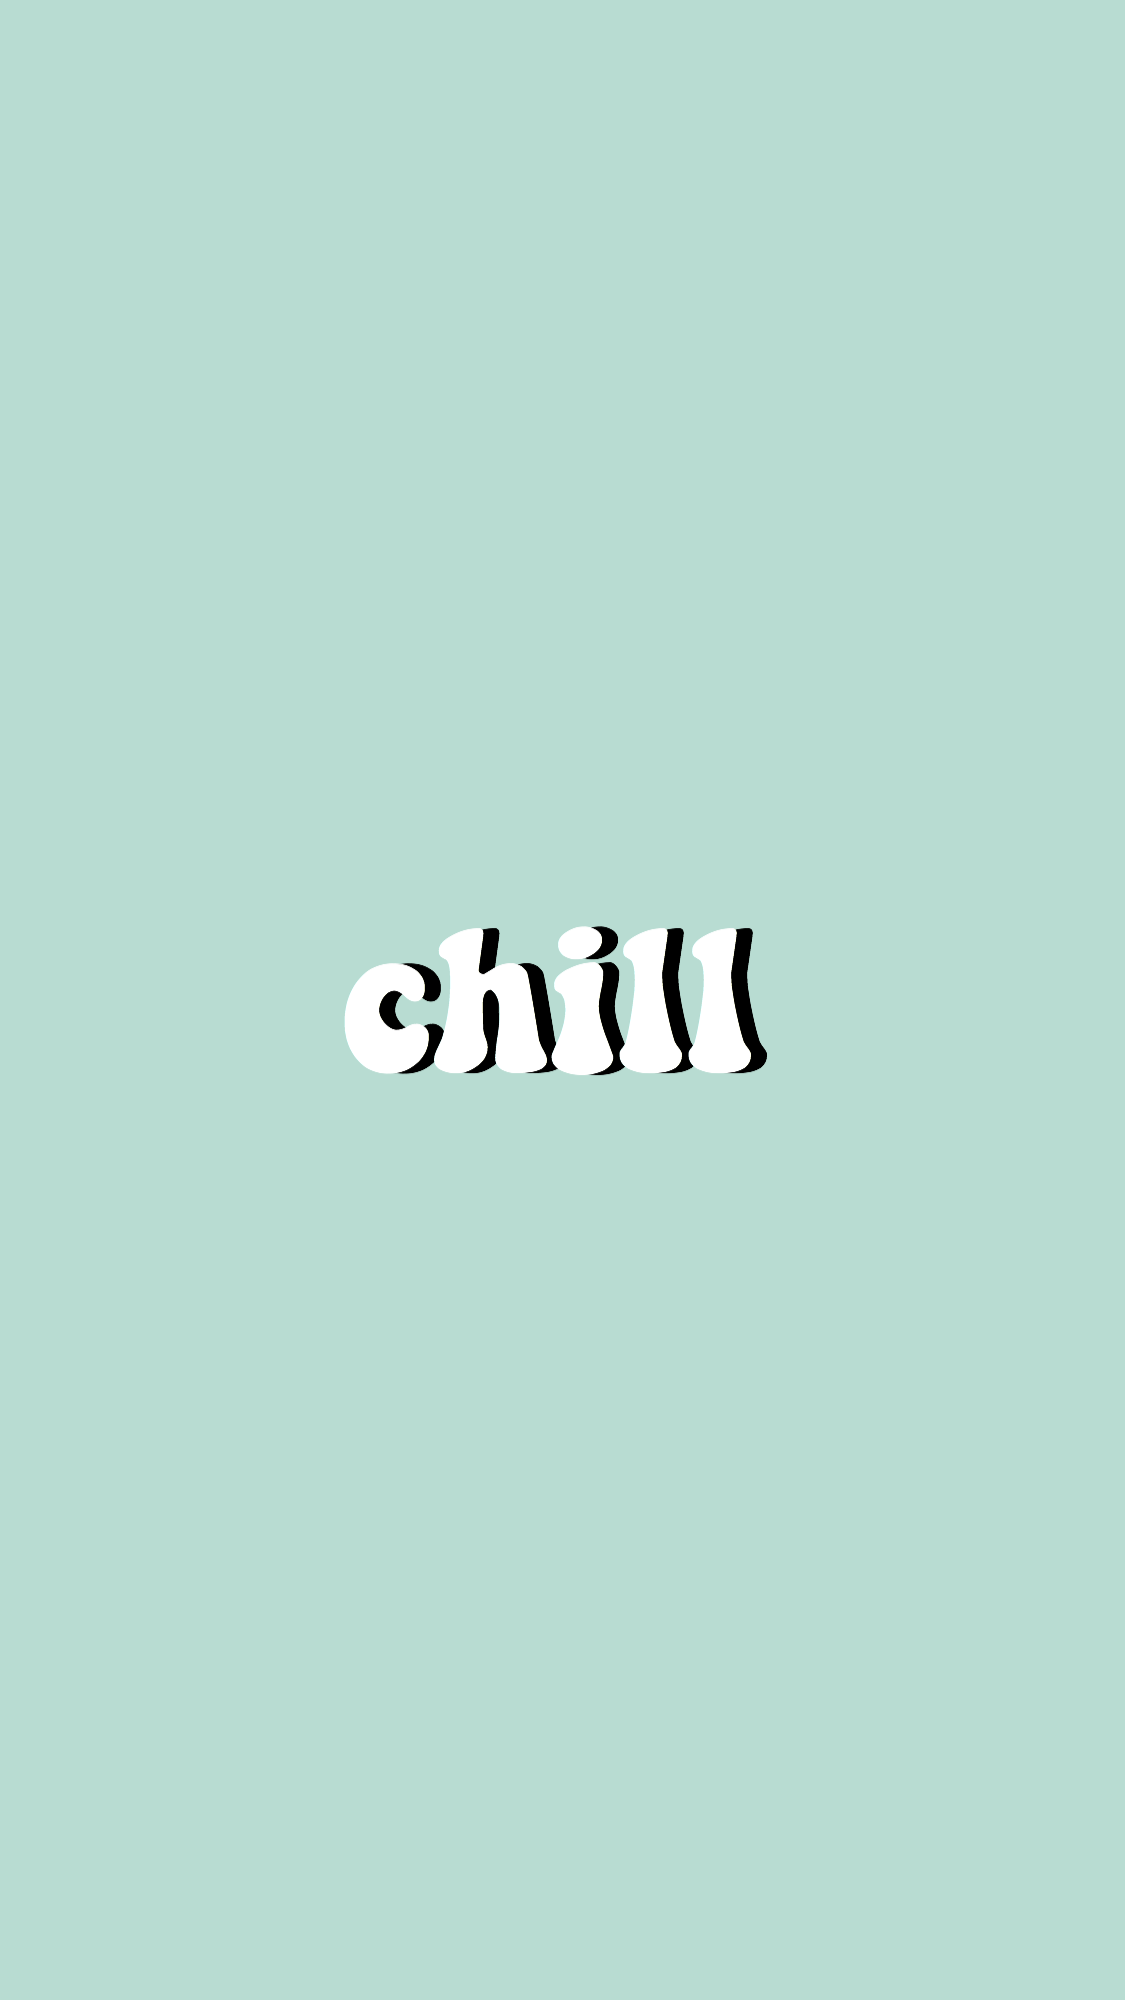 Chill Aesthetic Wallpapers